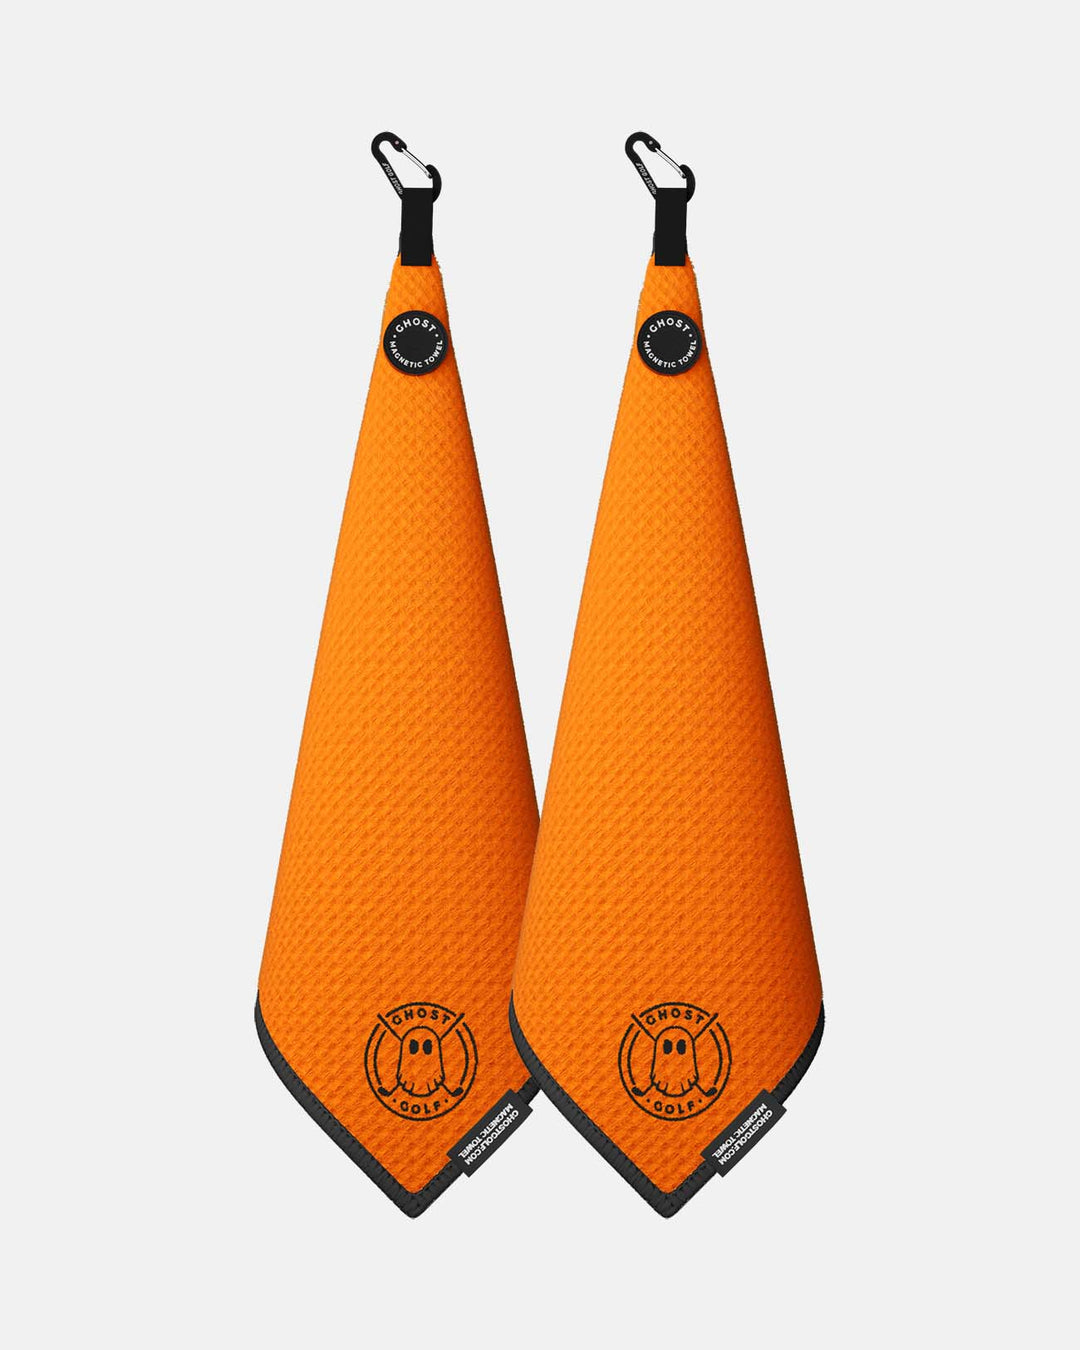 2 Greenside towels with Magnet Patch and Carabiner. Color Orange